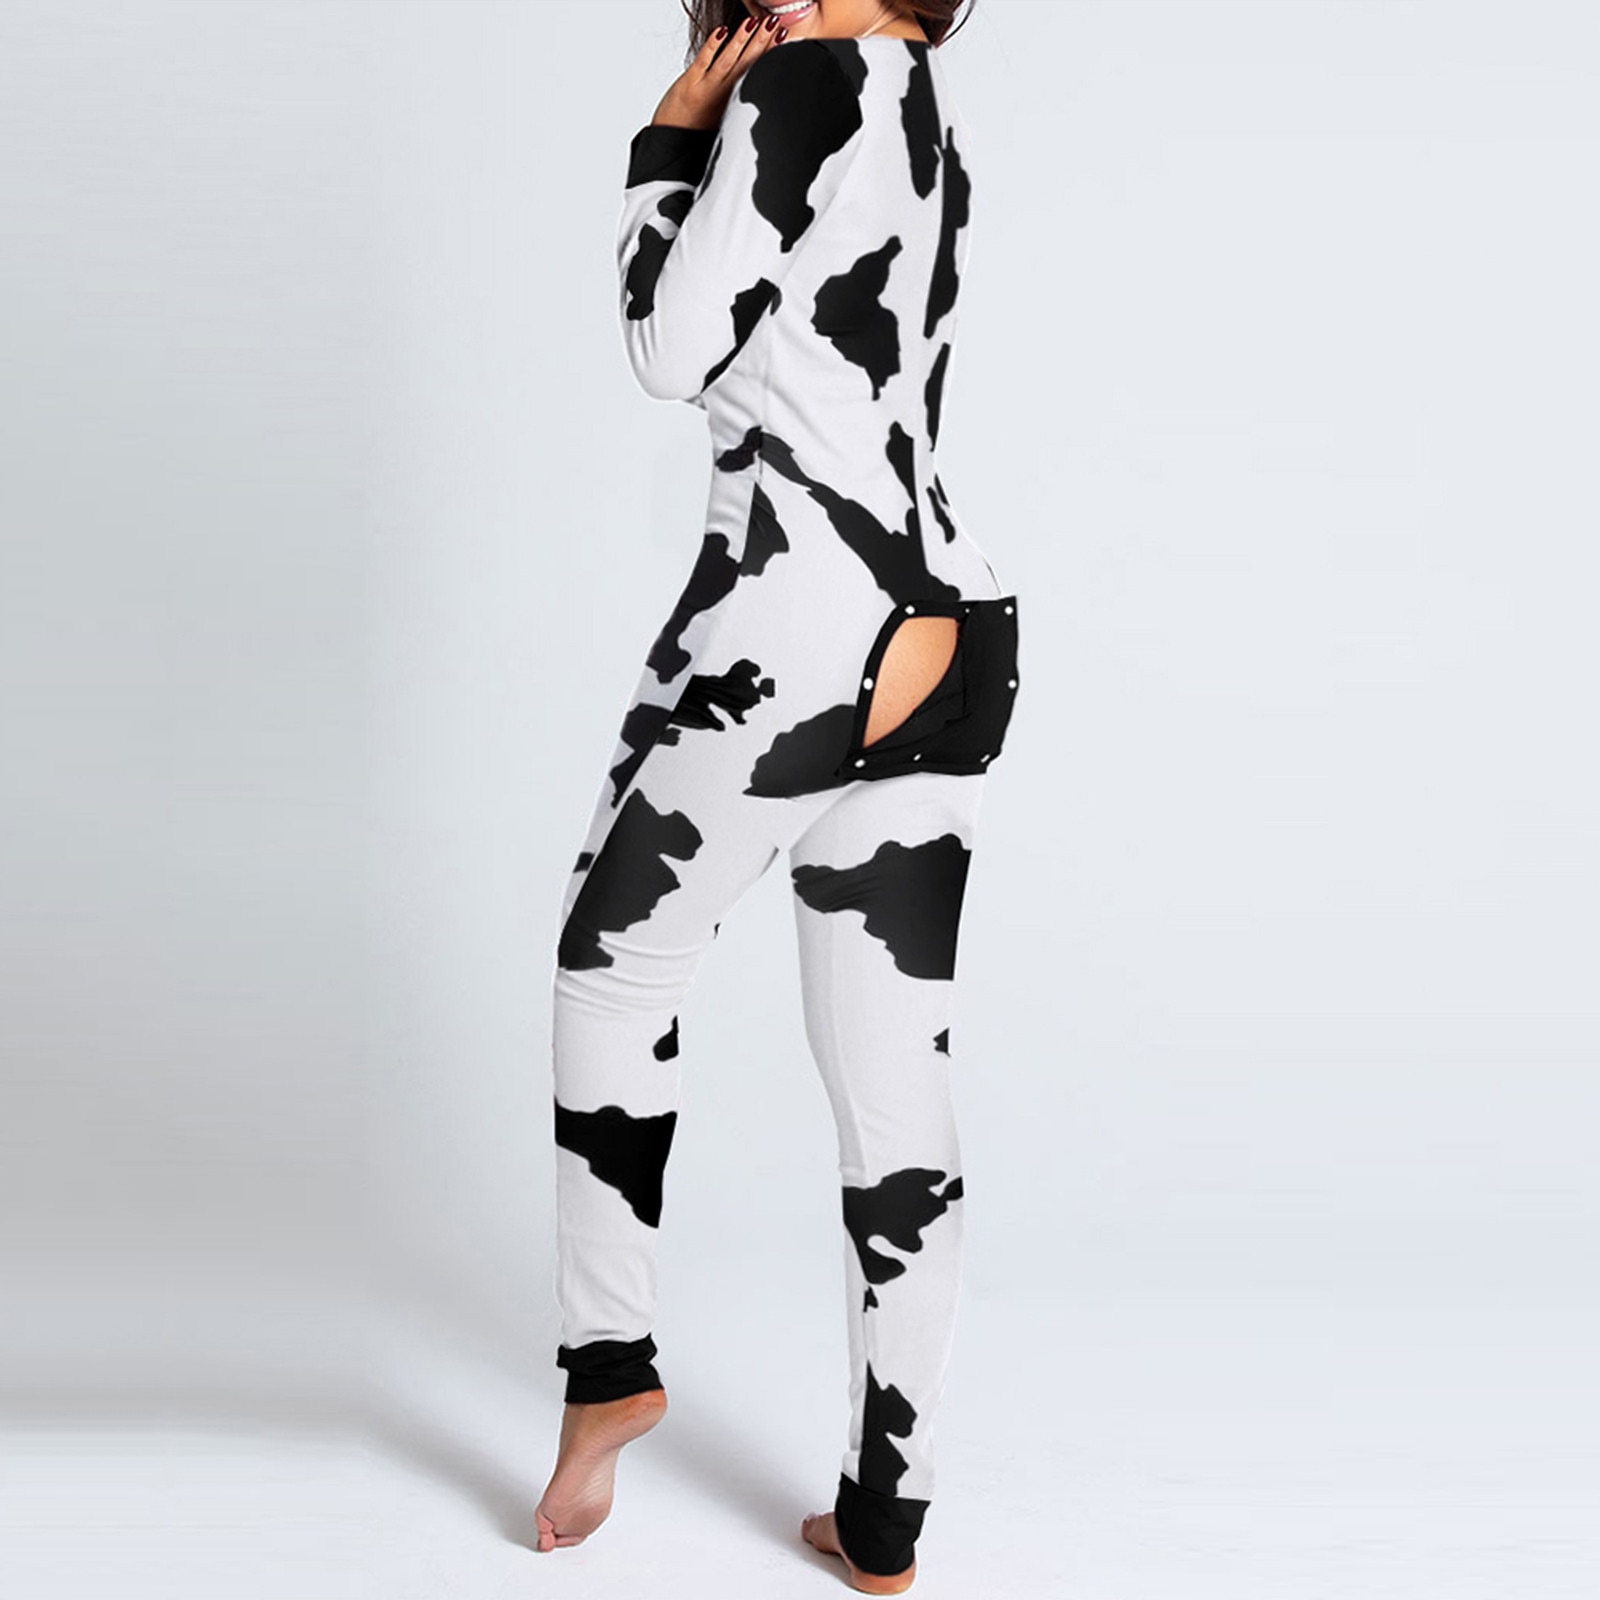 New Women Fashion Elegant Casual Animals Cow Print Functional Buttoned Flap Adults Pajamas Jumpsuit Sexy Ladies - The Cow Print